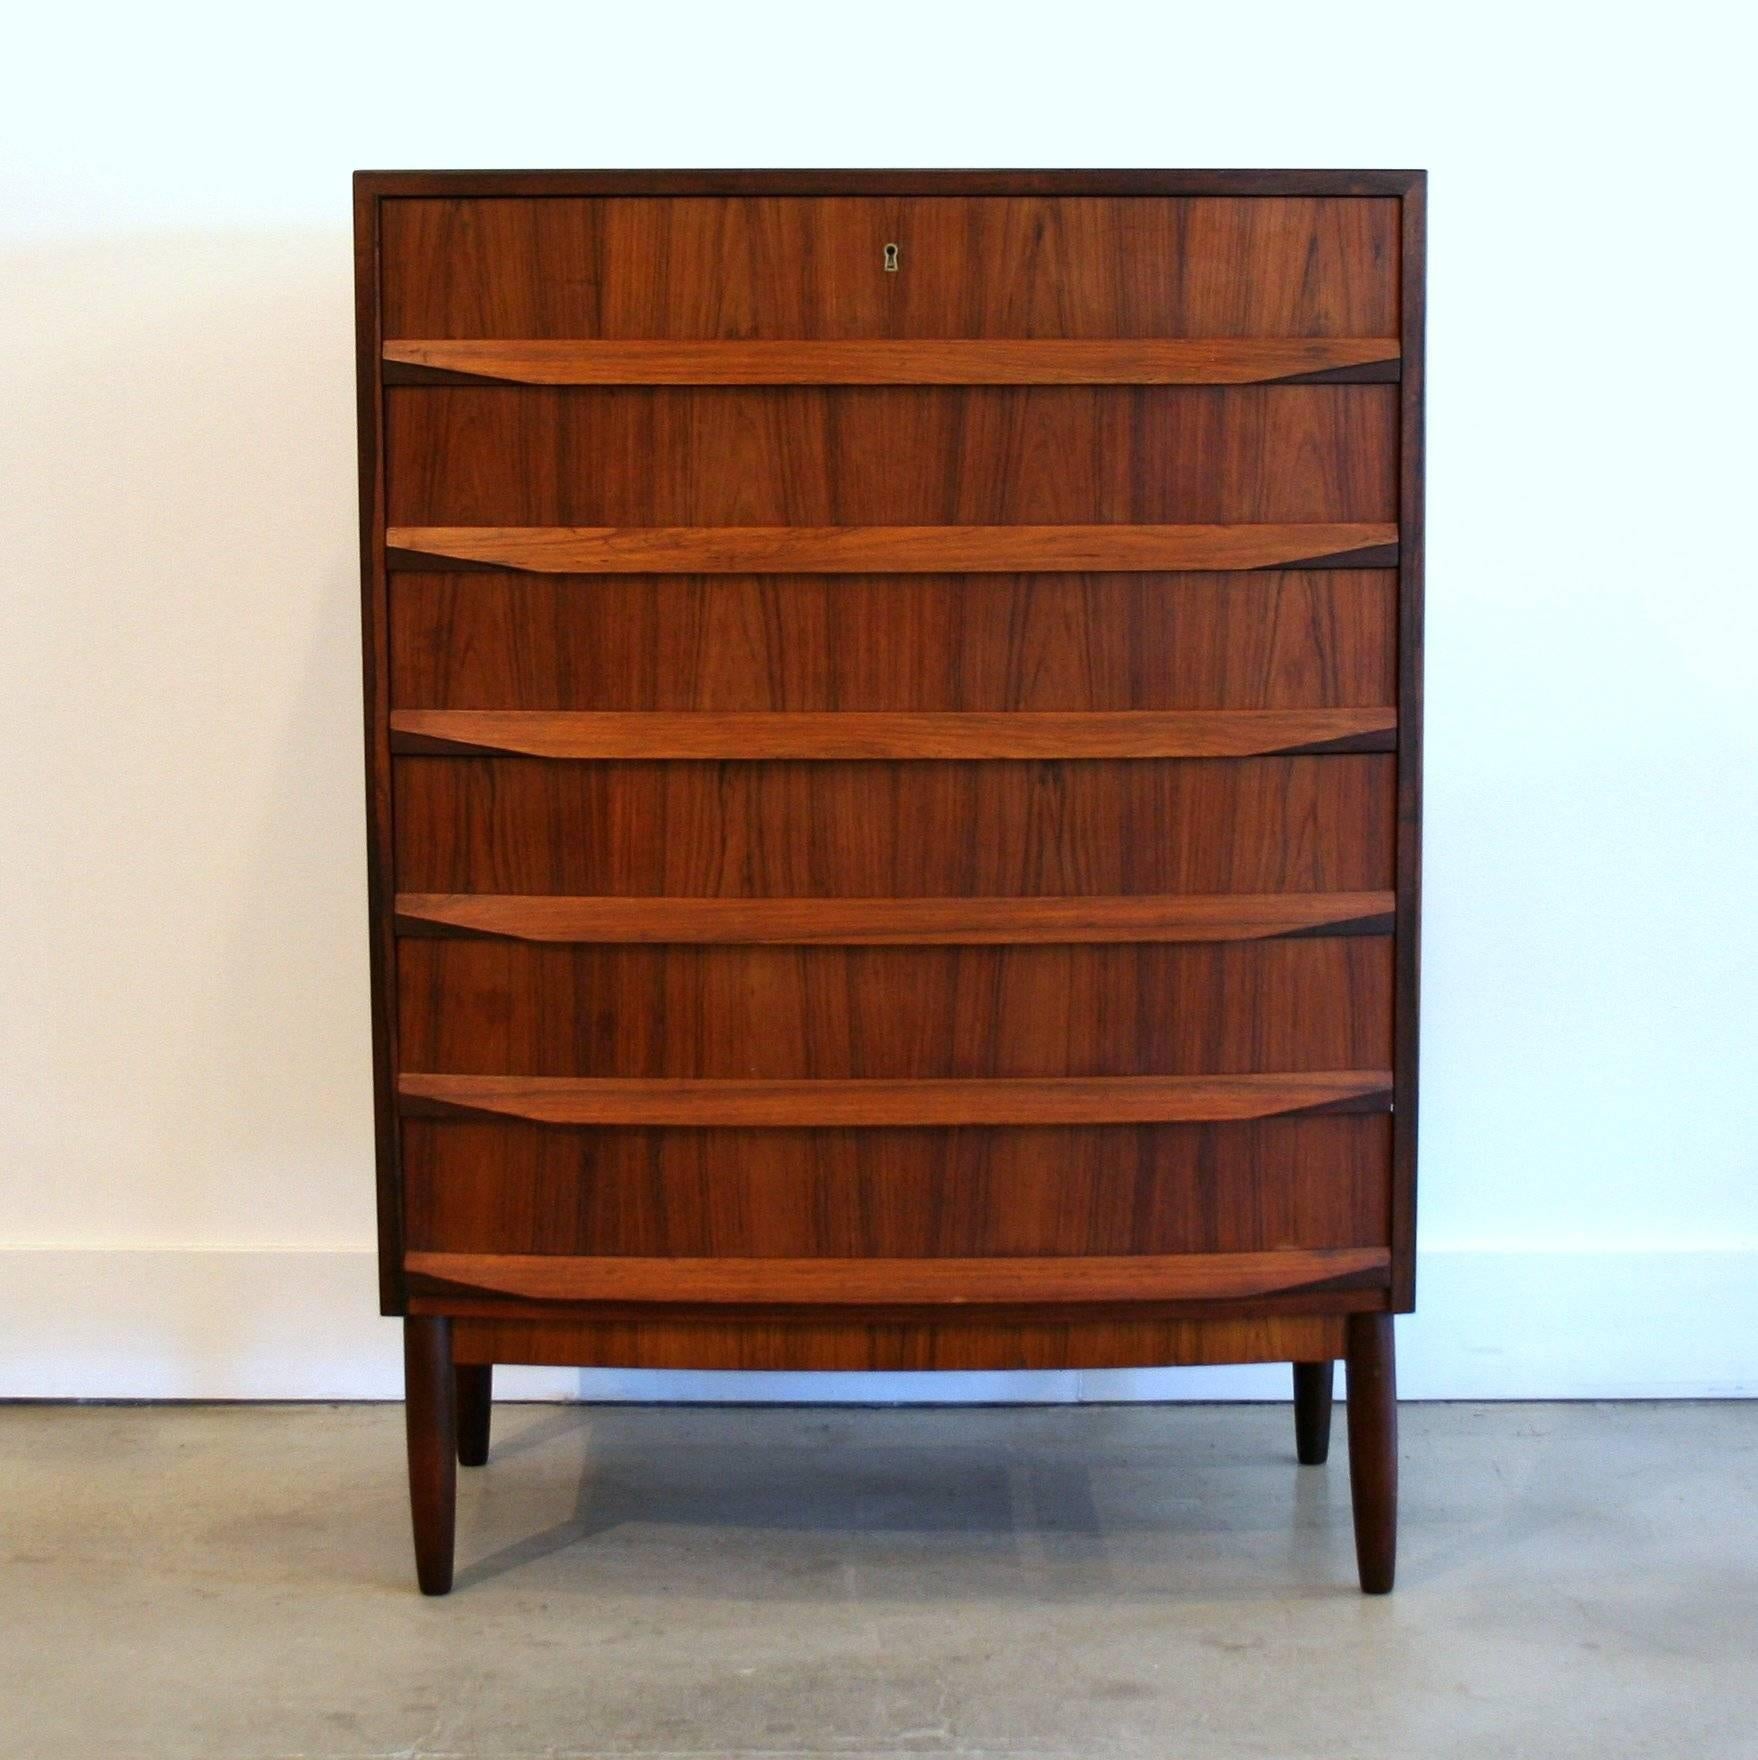 A beautiful six-drawer dresser in Brazilian rosewood with conical legs and unique drawer pulls on dove-tailed drawers. This piece features an exquisite wood grain and dark edge detailing.